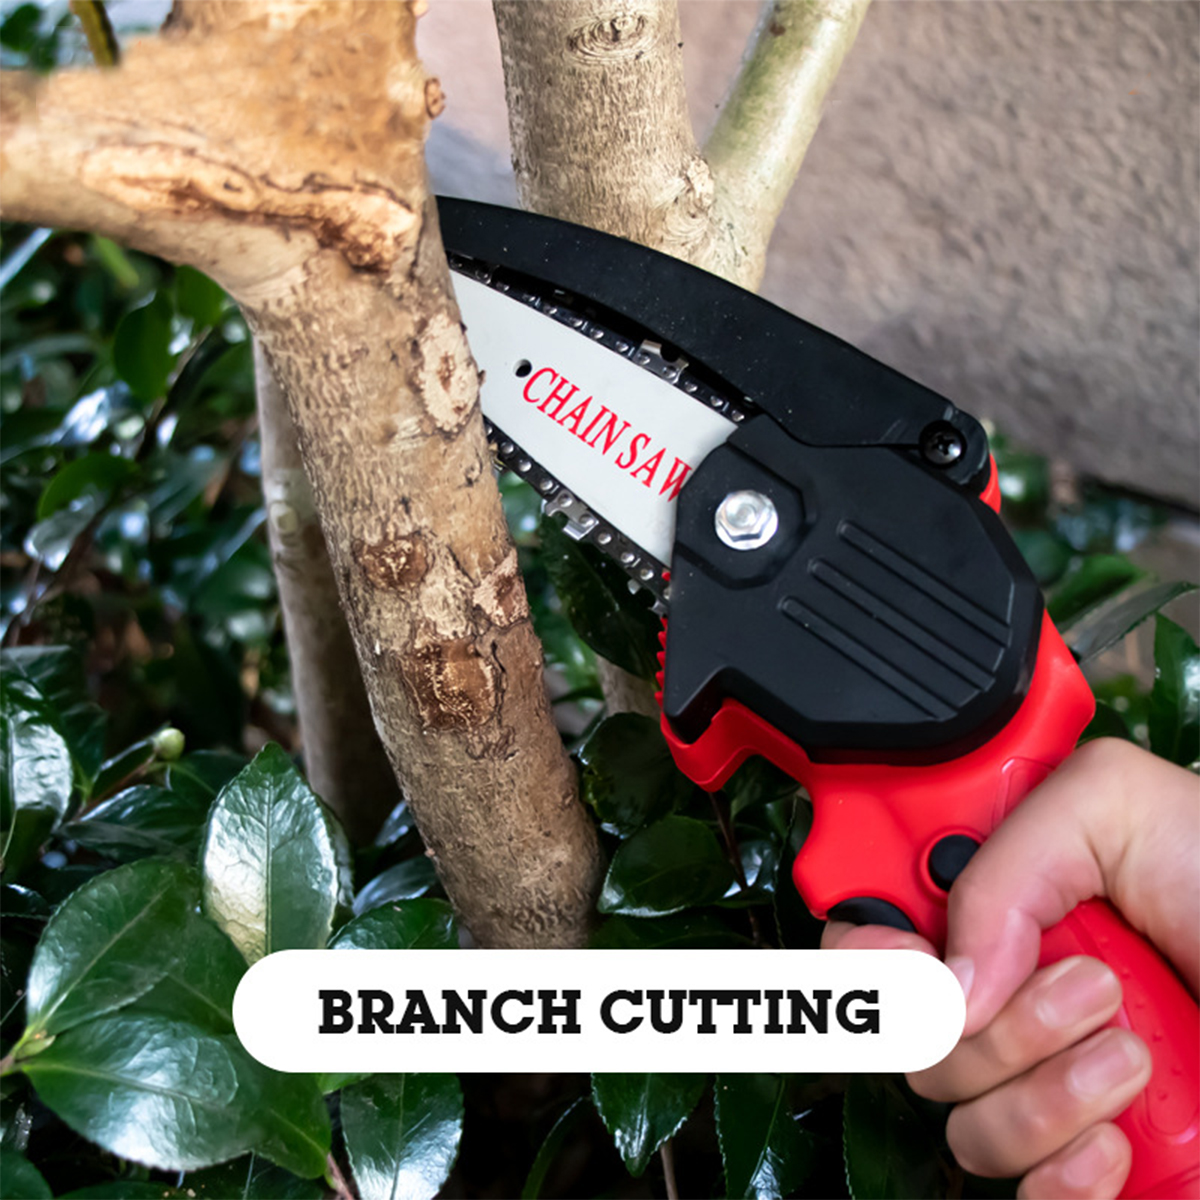 Portable-Electric-Saw-Woodworking-Chain-Saw-Tree-Pruning-Tool-for-18V-MakitaIzumi-Battery-1764621-5